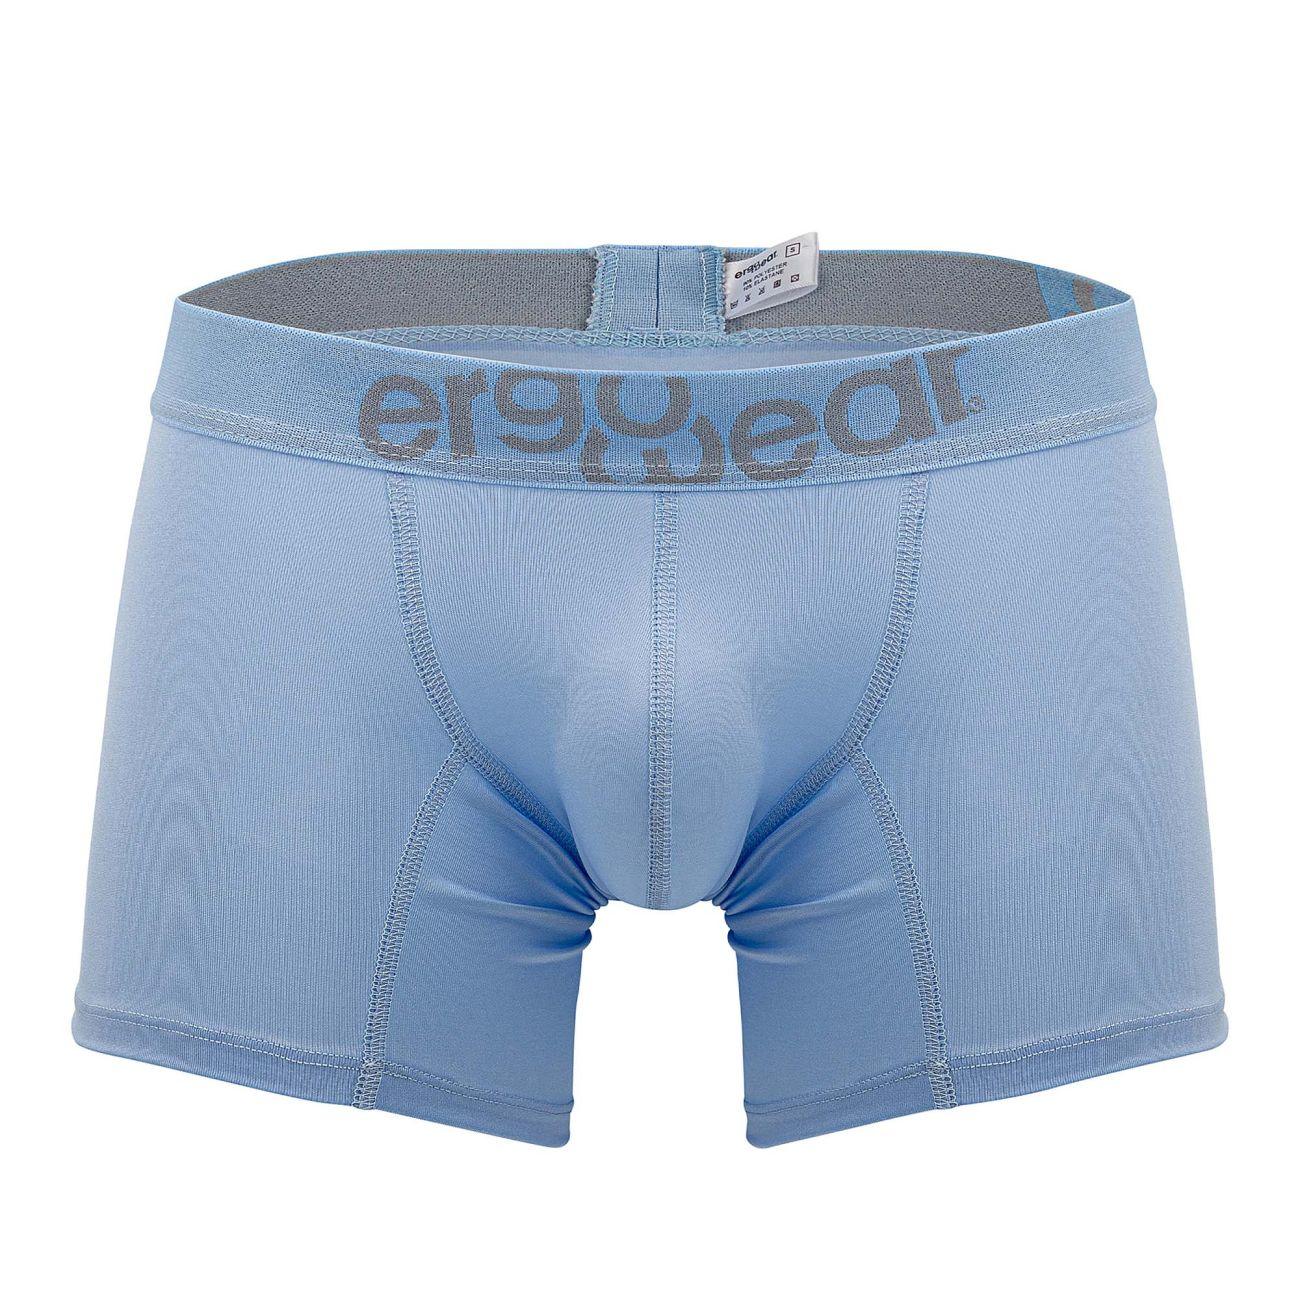 image of product,HIP Trunks - SEXYEONE